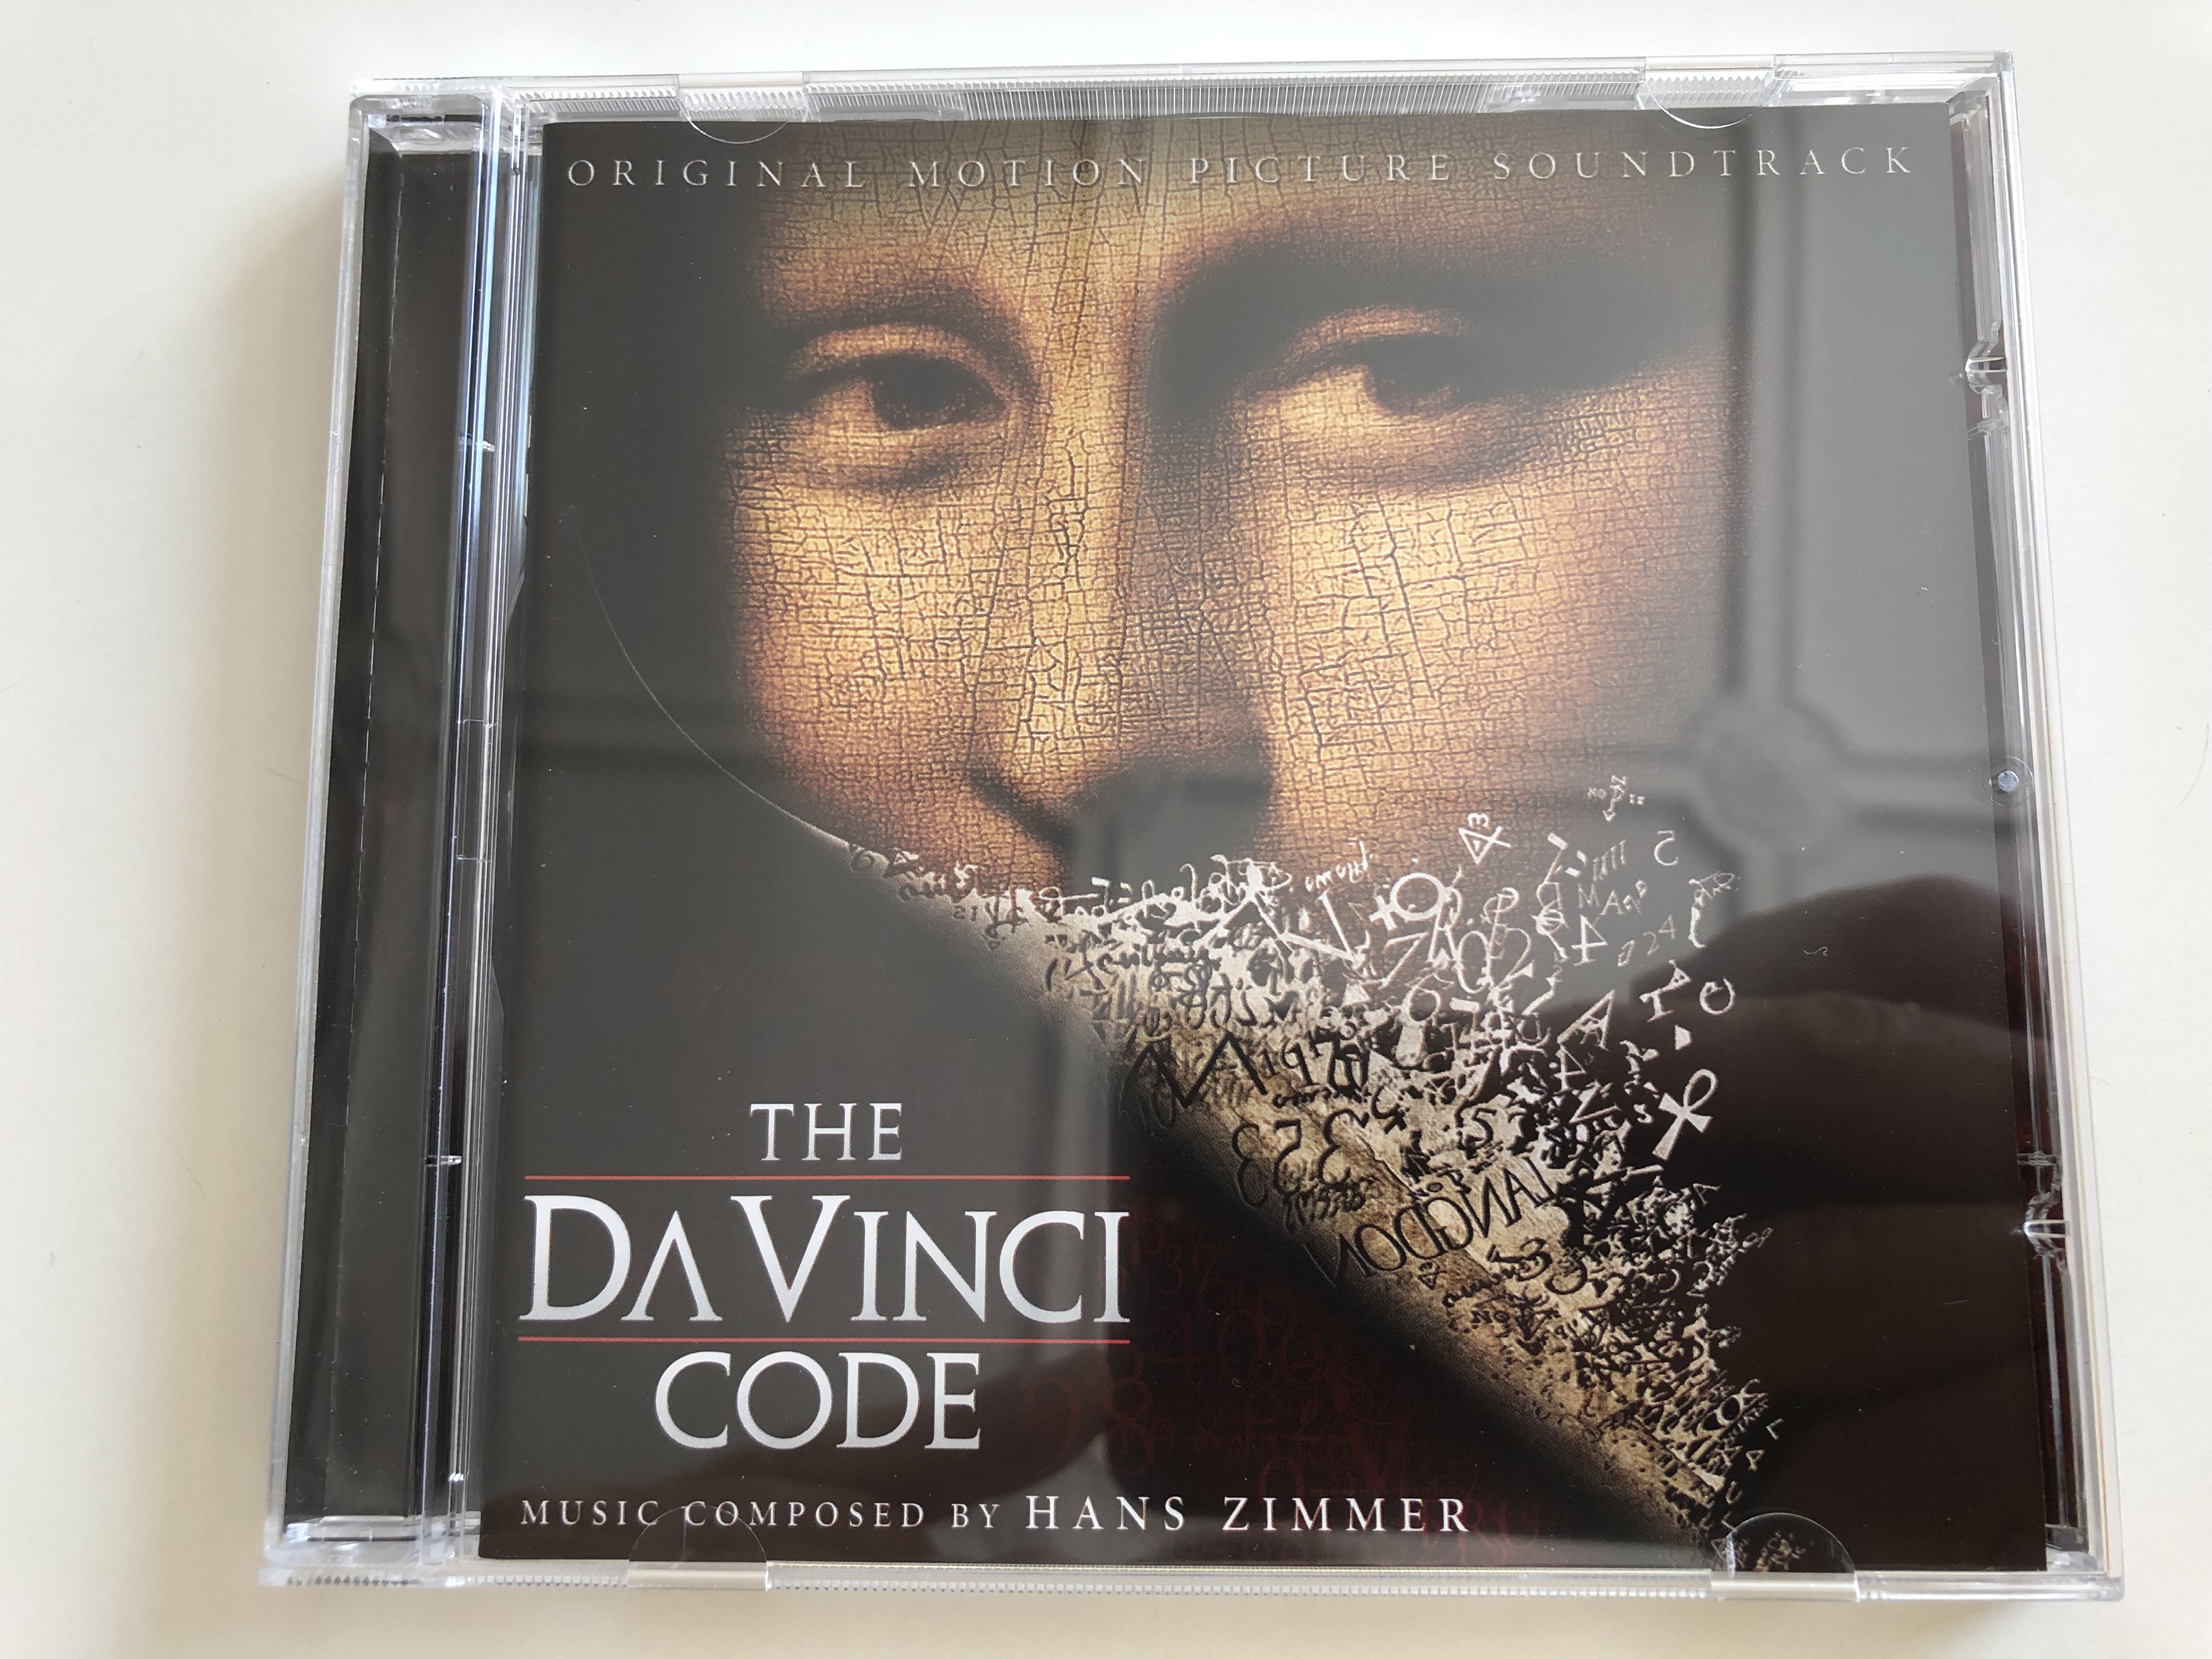 the-davinci-code-original-motion-picture-soundtrack-composed-by-hans-zimmer-audio-cd-2006-decca-985-4041-1-.jpg